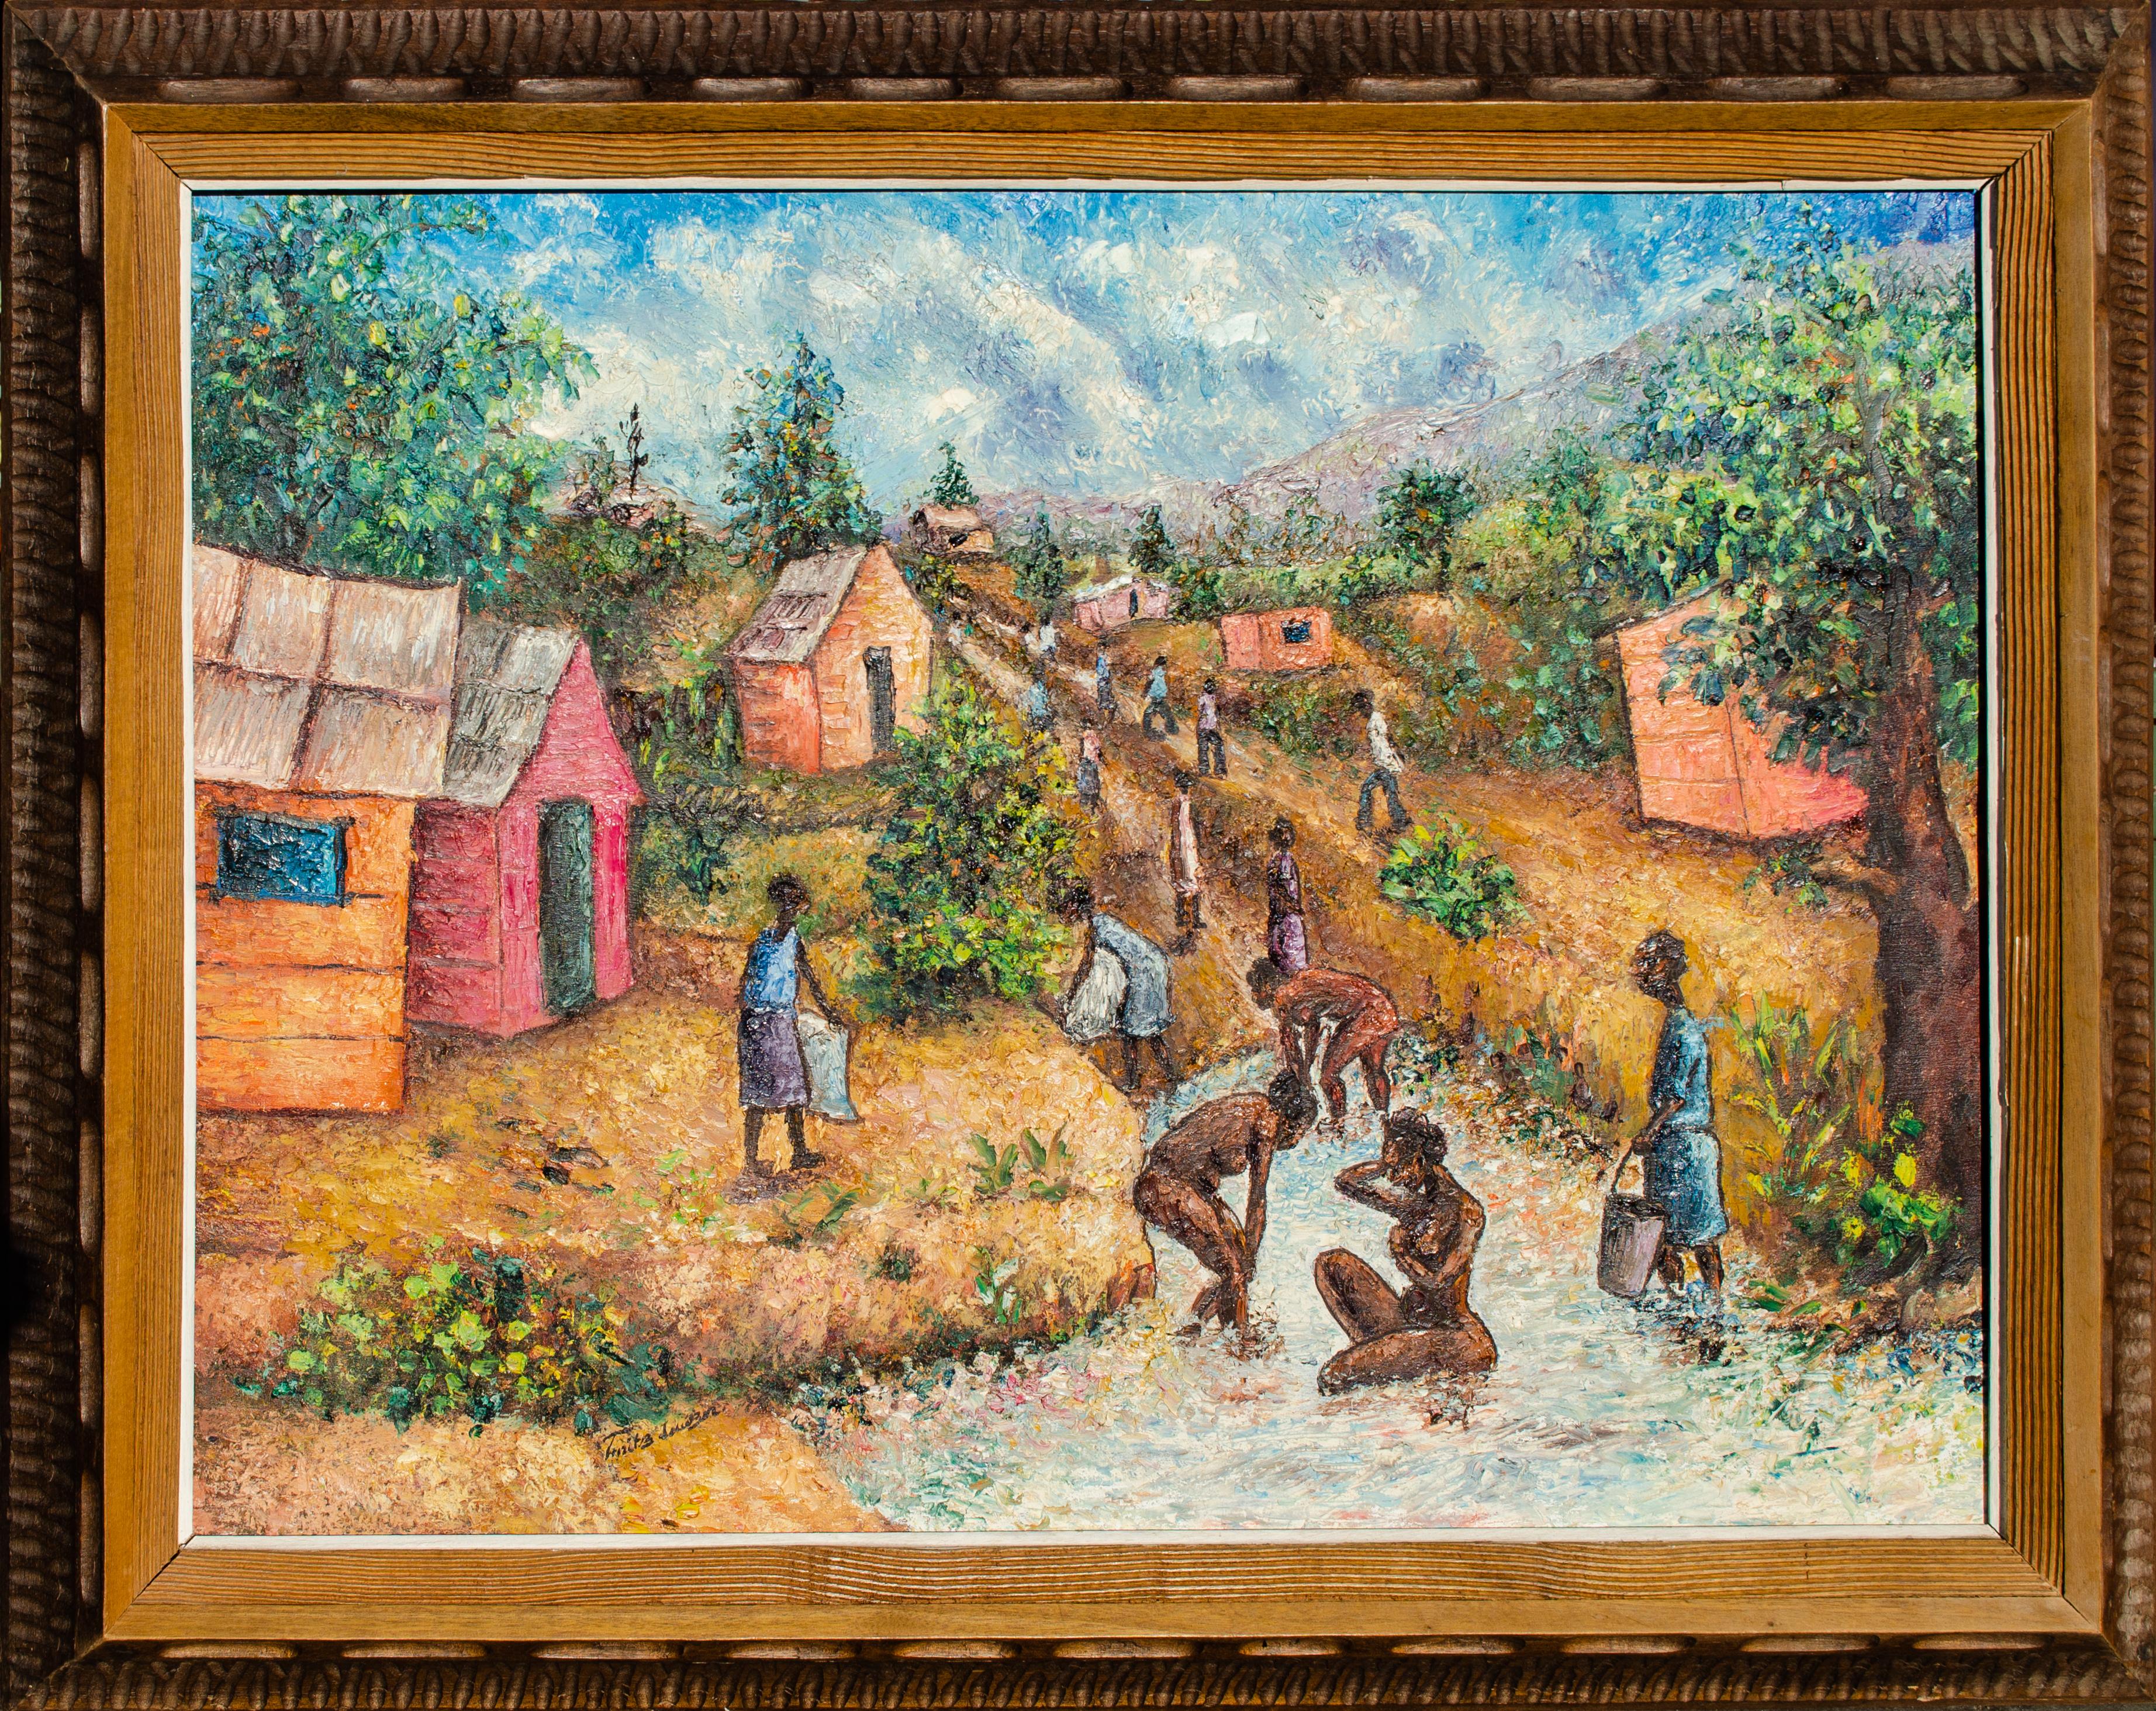 Unknown Landscape Painting - Haitian Painting of Village Women Bathing